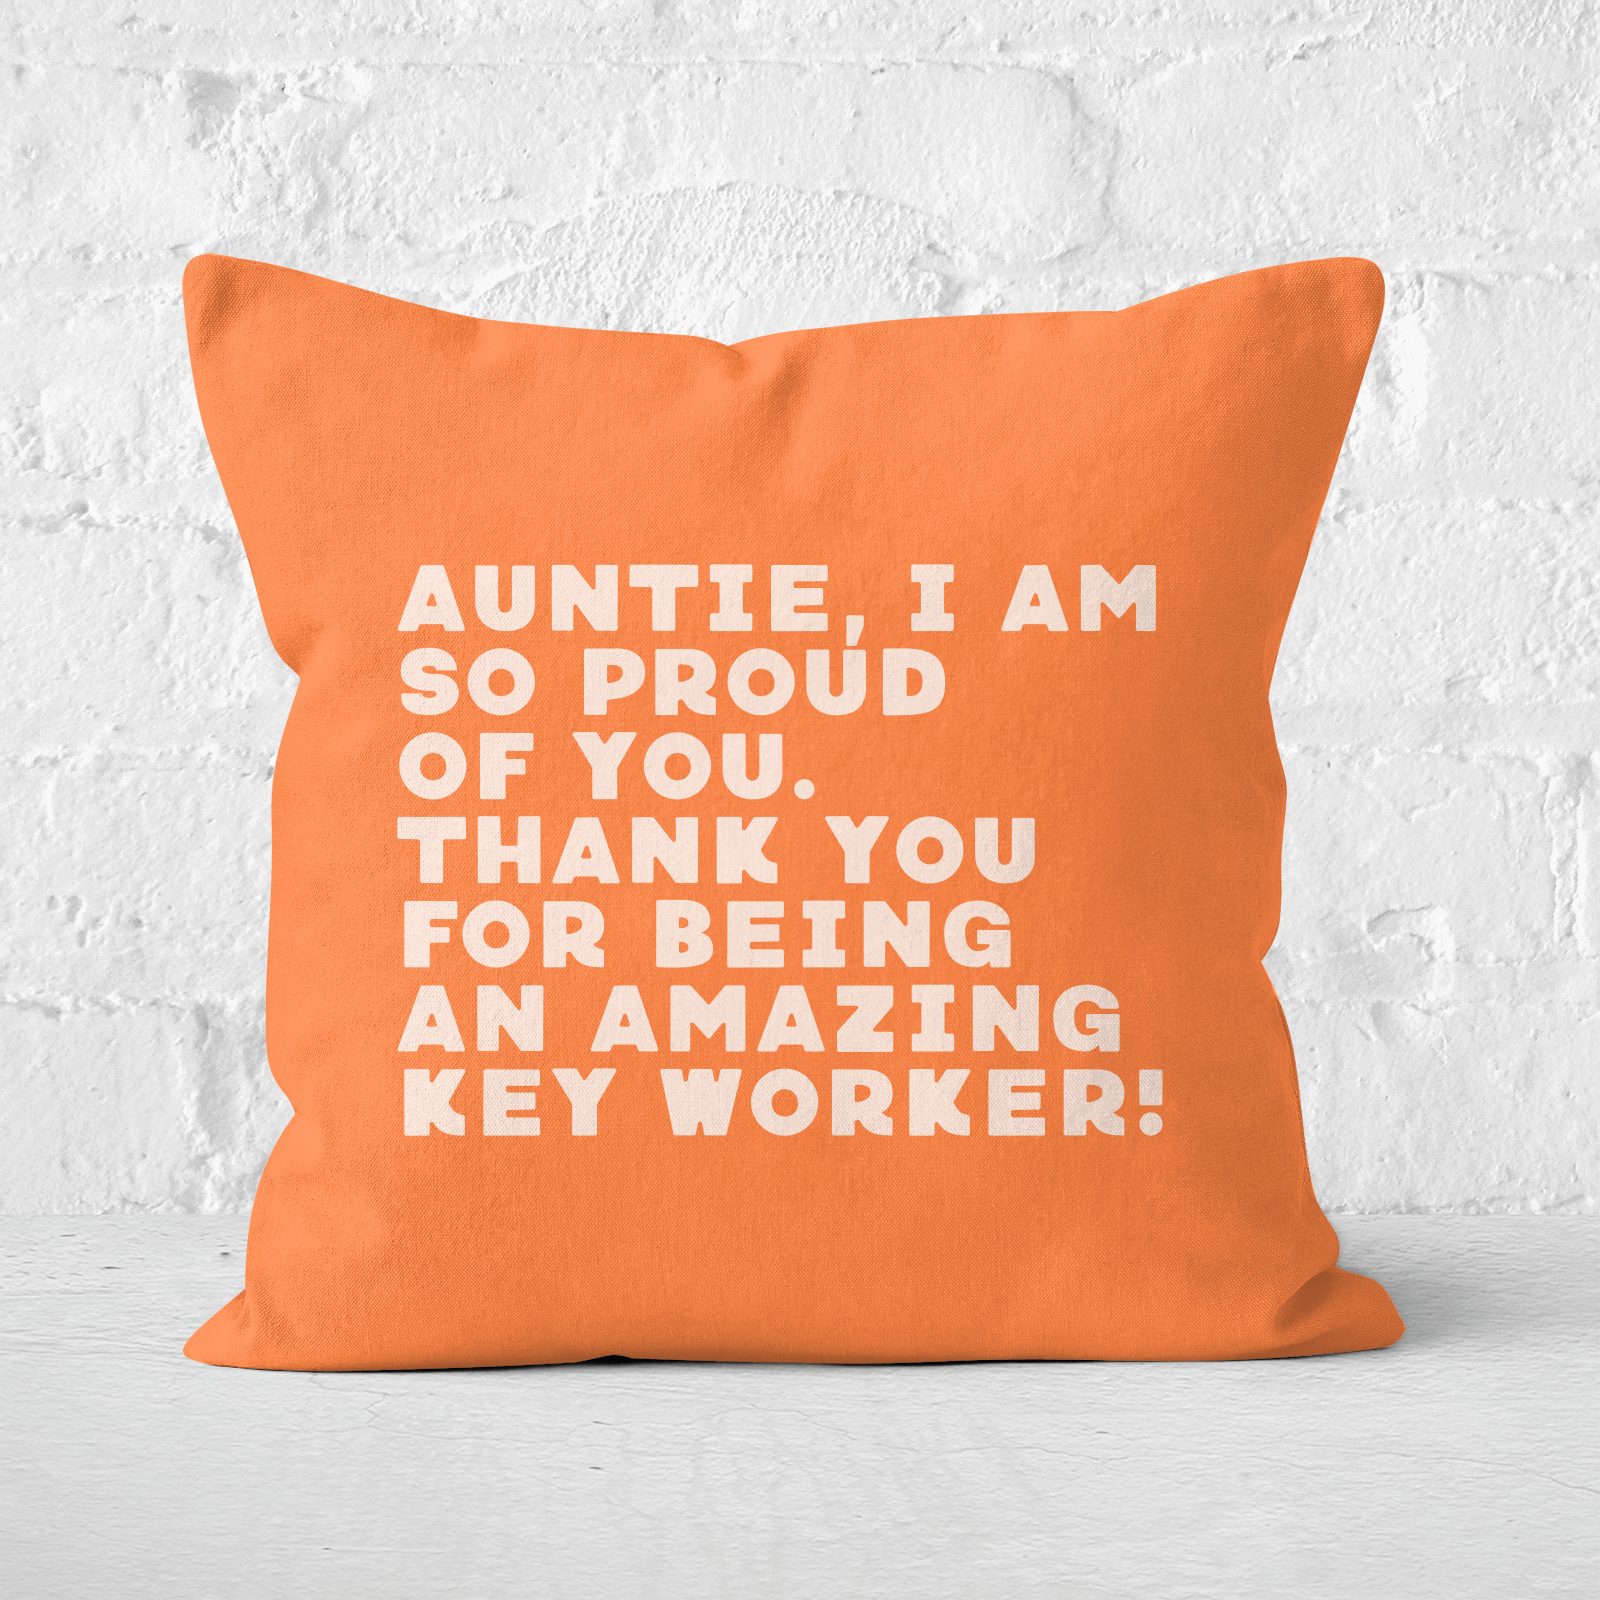 Auntie, I Am So Proud Of You. Square Cushion - 60x60cm - Soft Touch